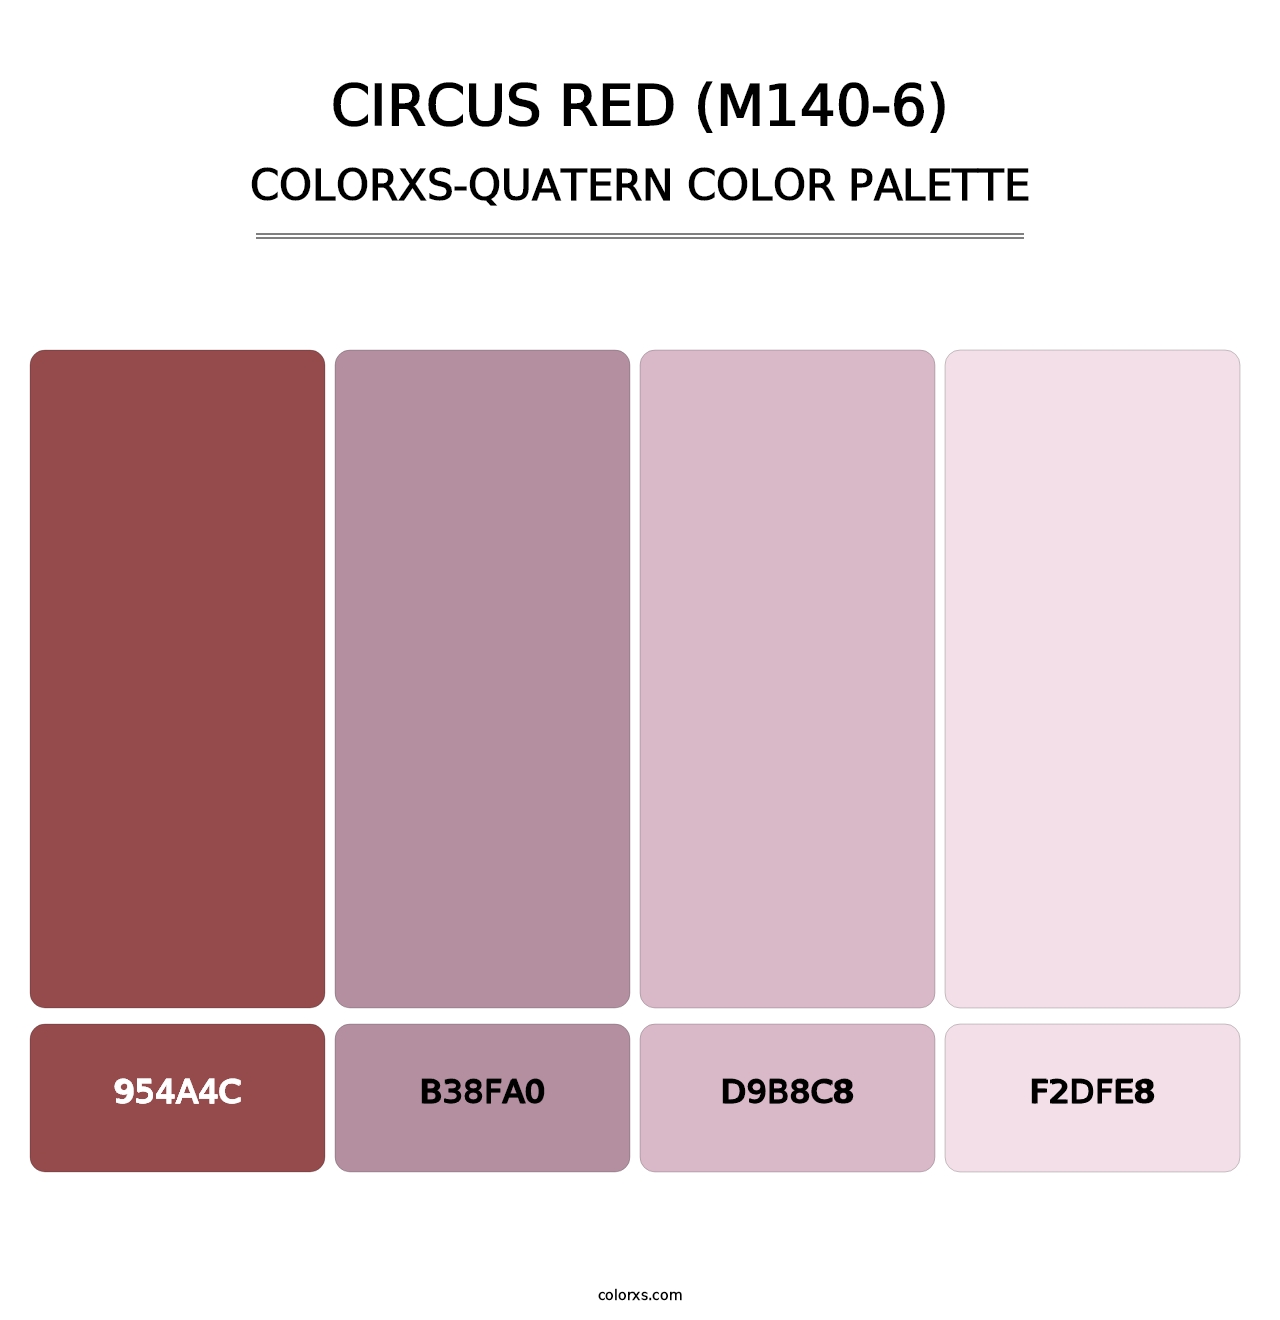 Circus Red (M140-6) - Colorxs Quatern Palette